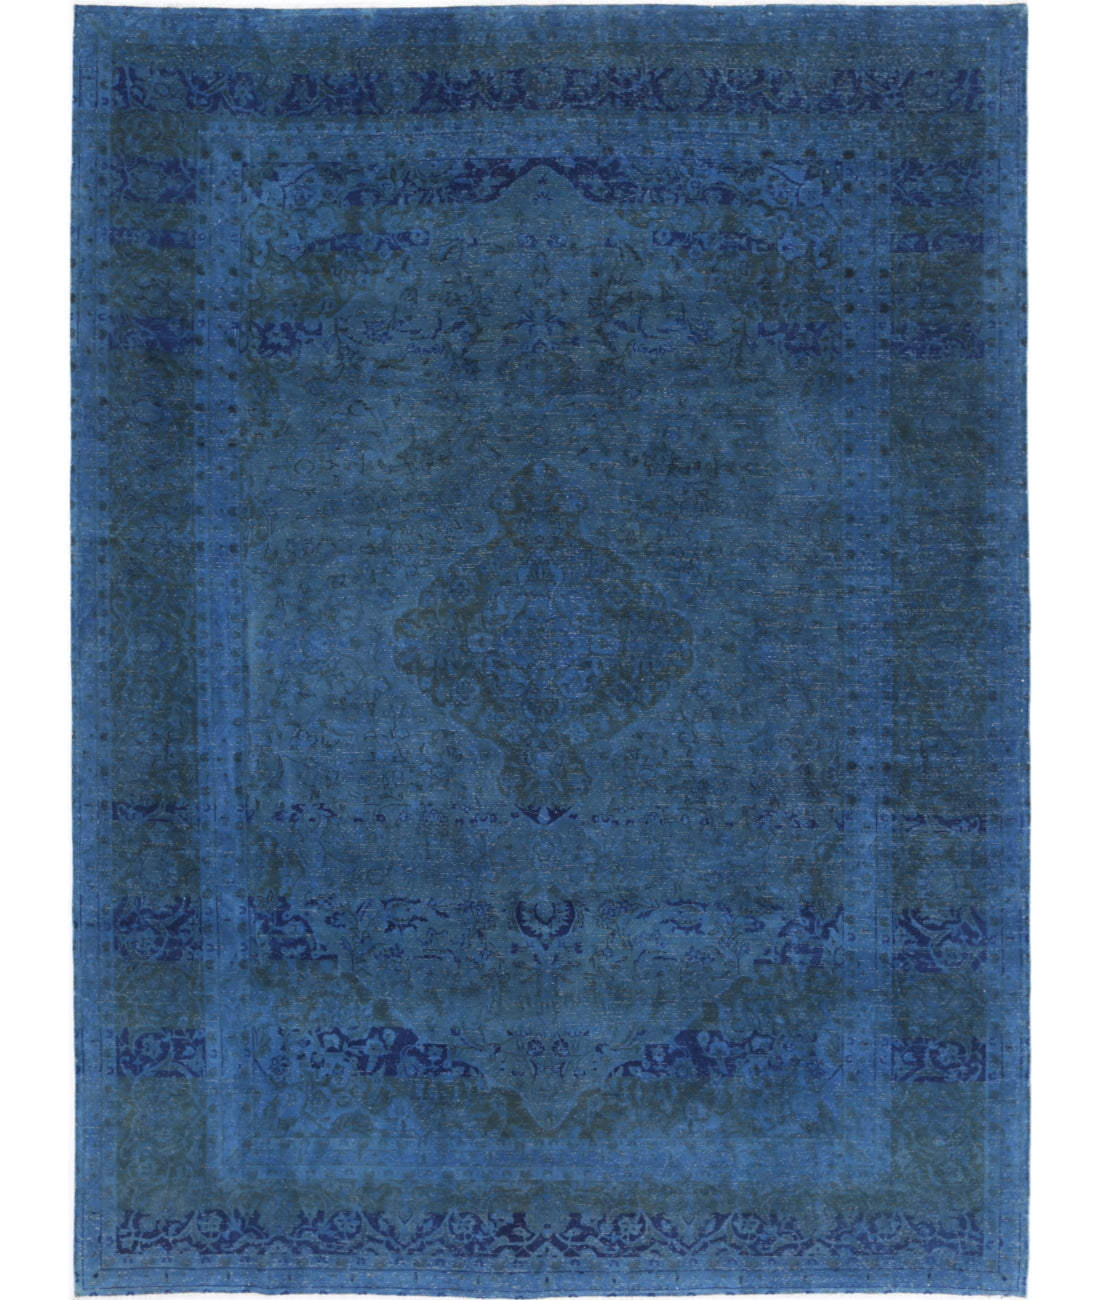 Hand Knotted Transitional Overdye Kashan Wool Rug - 8'2'' x 11'0'' 8'2'' x 11'0'' (245 X 330) / Blue / Blue